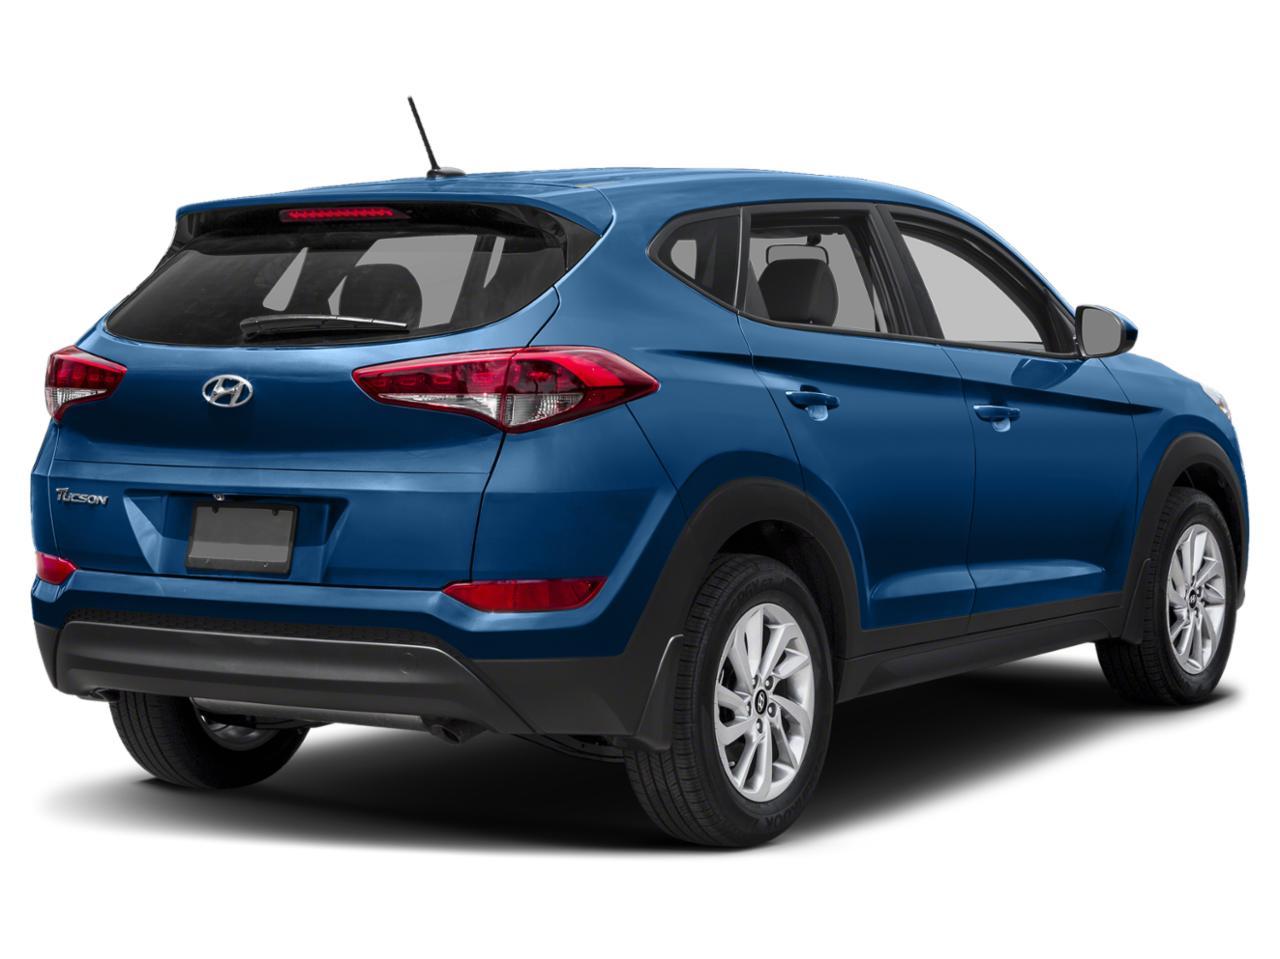 Used 2018 Hyundai Tucson SEL Plus AWD in Caribbean Blue for sale in ...